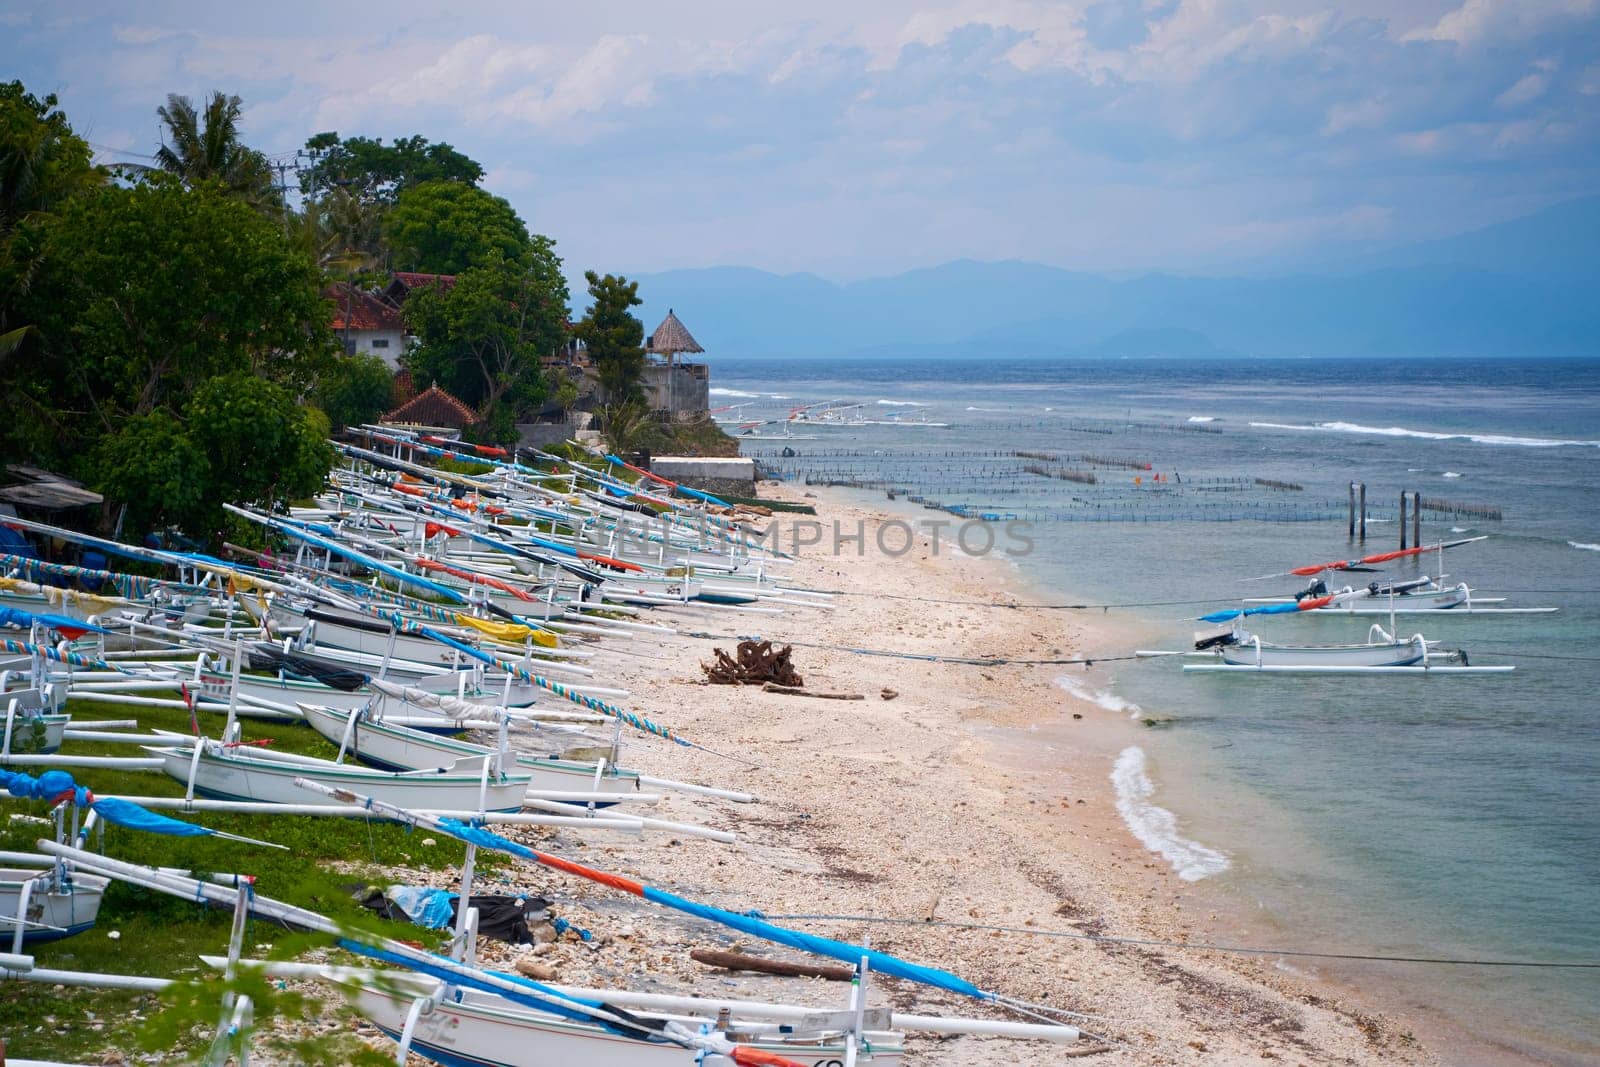 Traditional local colored fisherman's catamaran boats are lined up on the ocean shore on an island in Indonesia